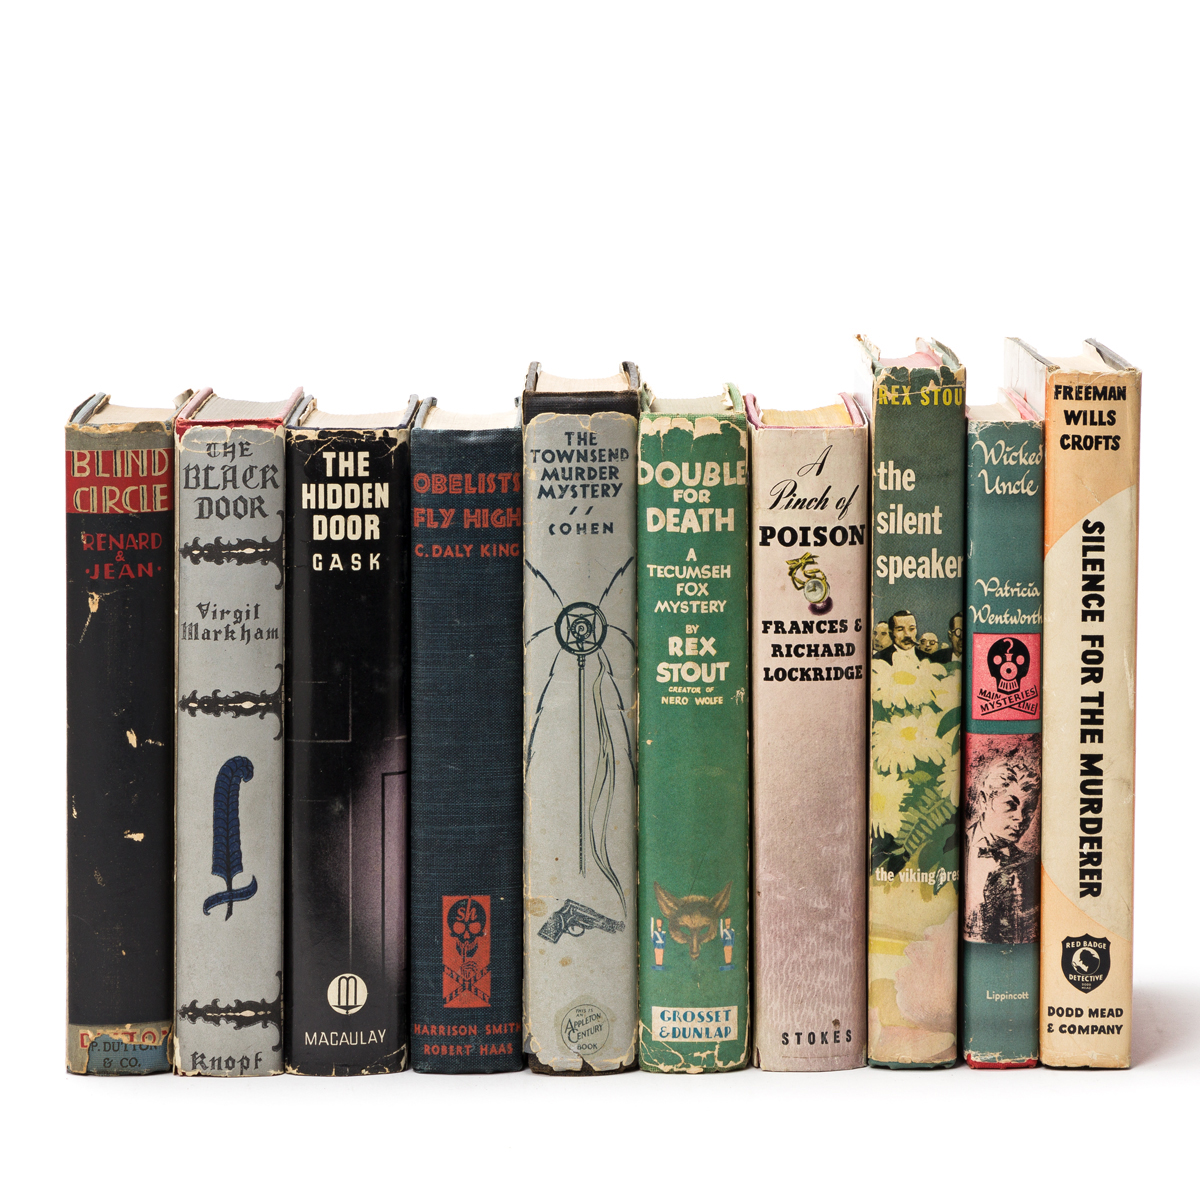 (MYSTERY and DETECTIVE FICTION.) Group of 10 Golden Age crime novels.